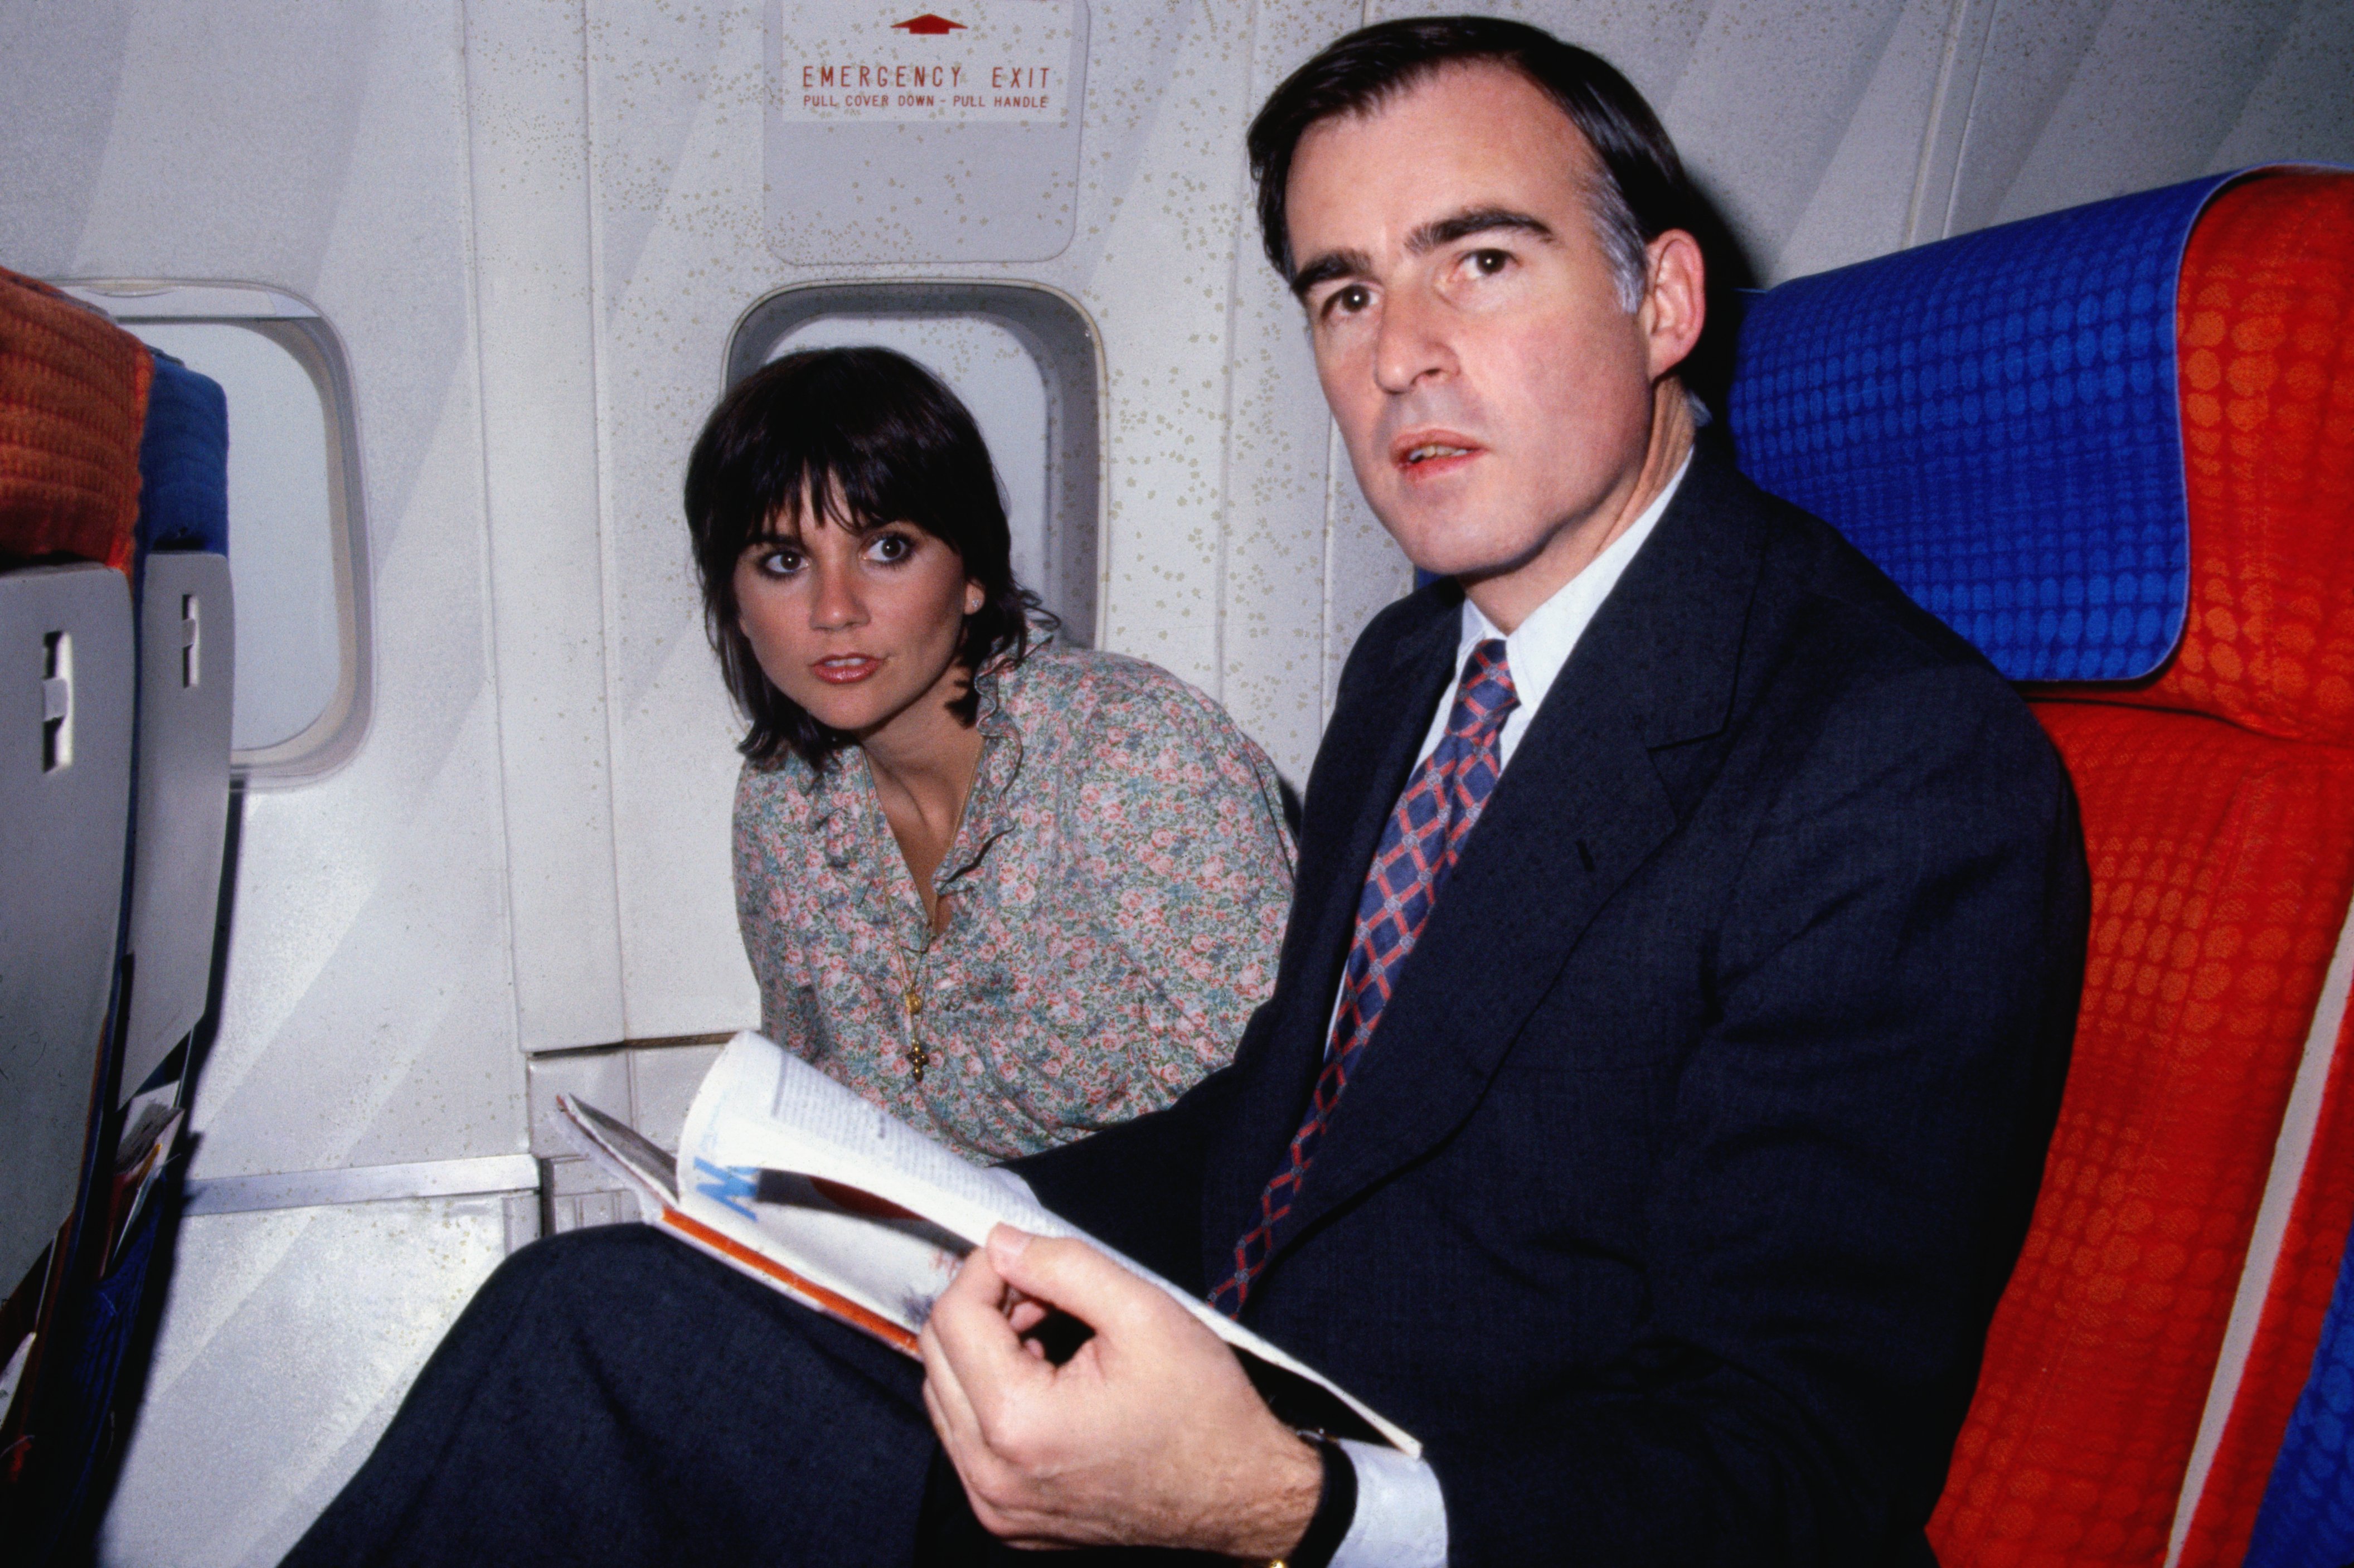 Linda Ronstadt and Jerry Brown on their way to Kenya for a safari trip on April 9, 1979 |  Source: Getty Images